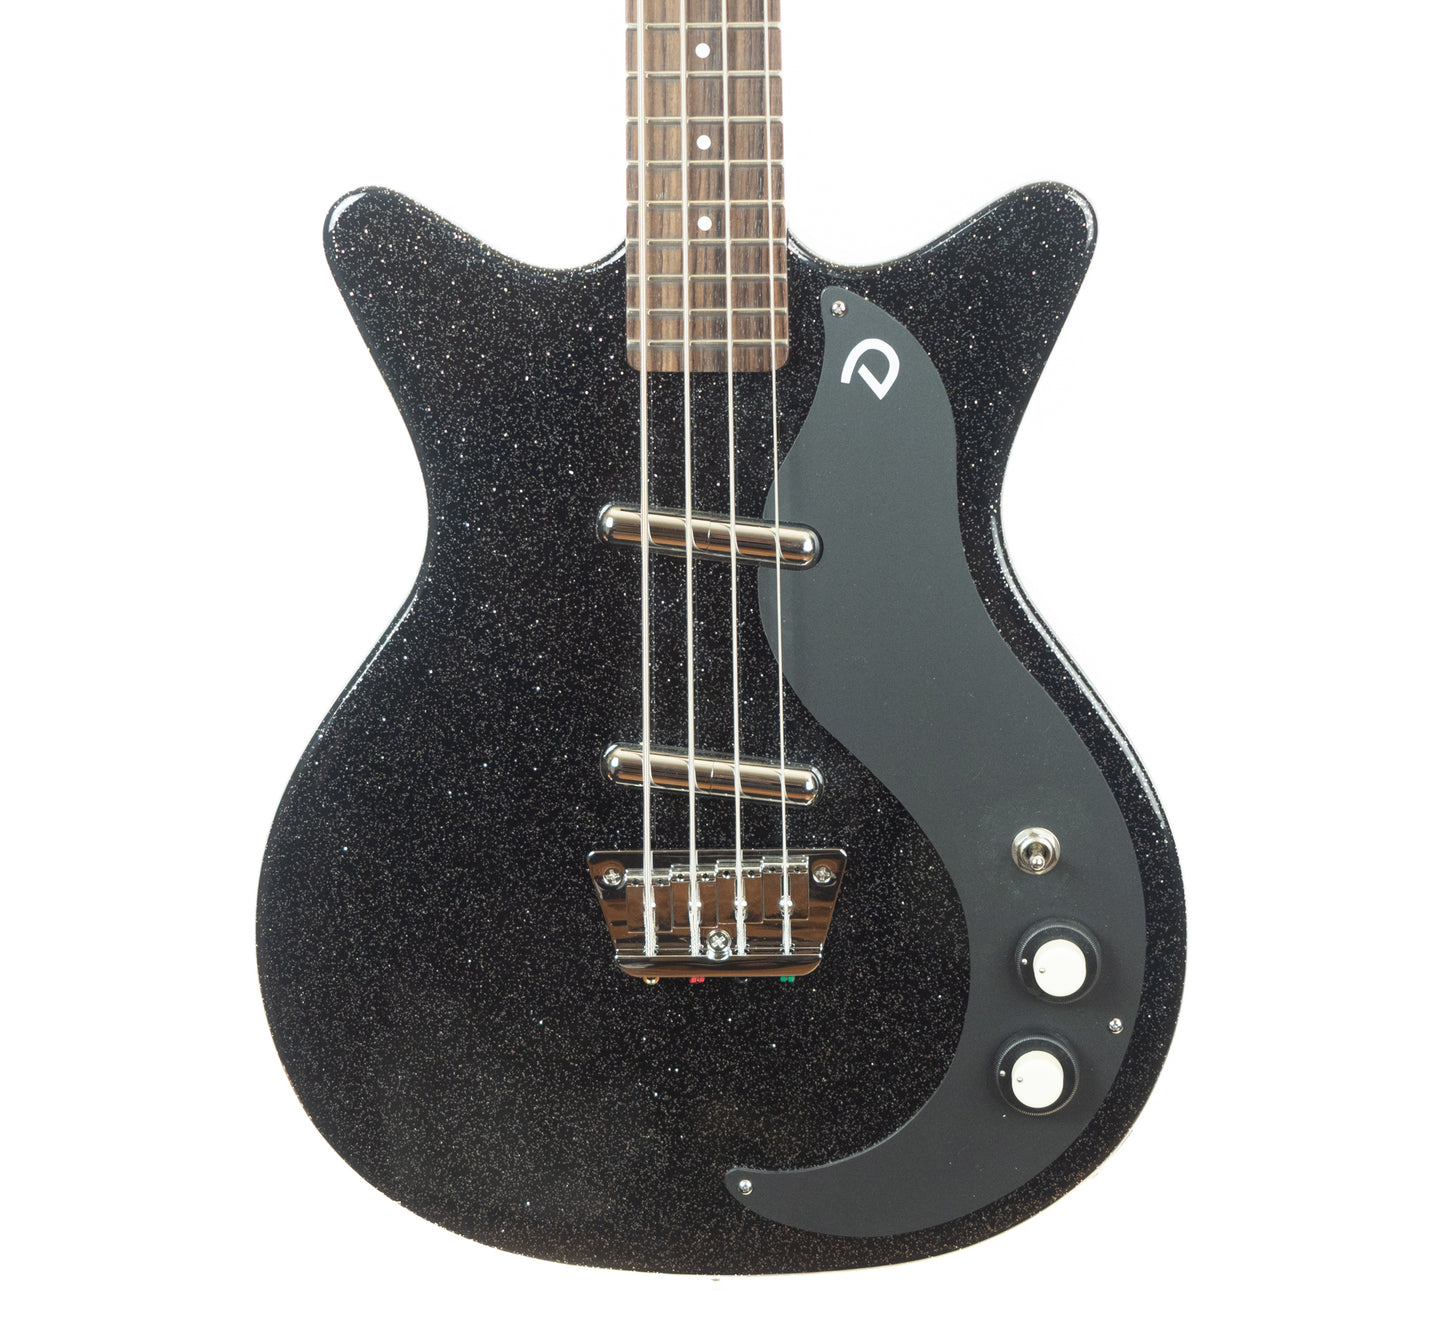 Danelectro 59DC Short Scale bass electric guitar, black metal flake, brand new, authorized dealer